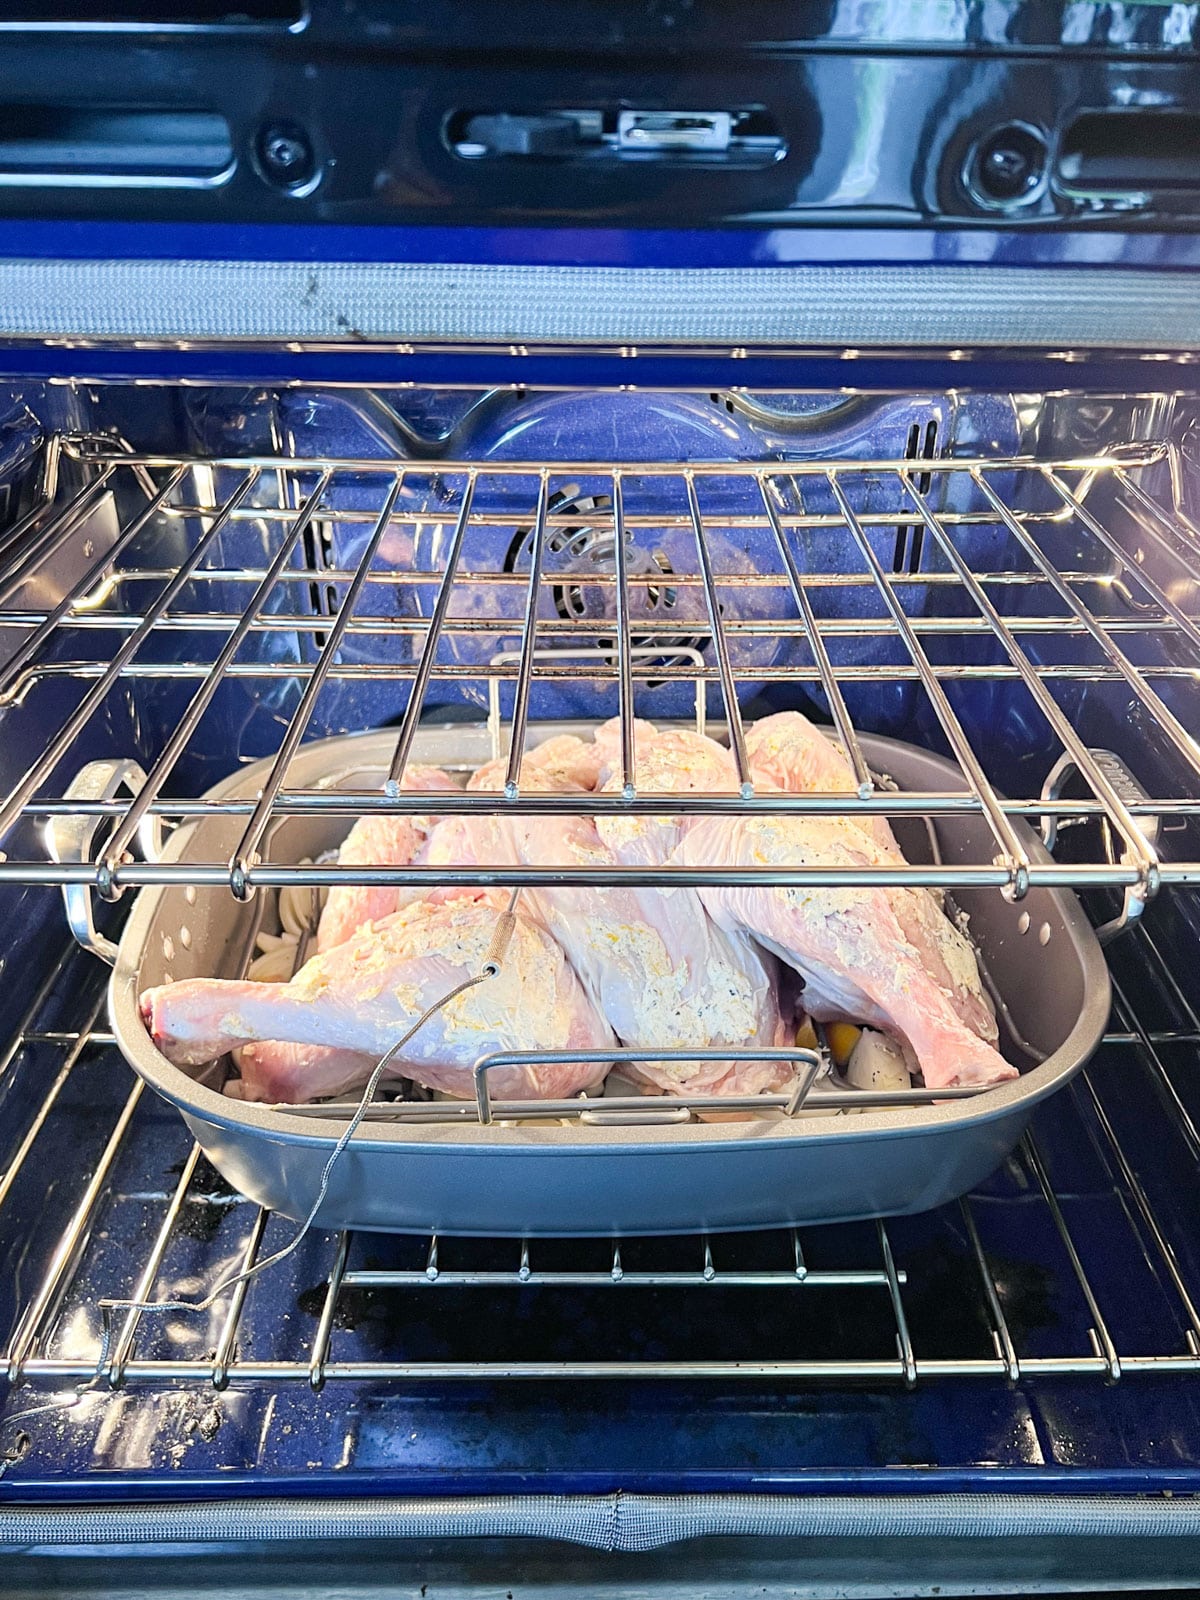 A spatchcocked turkey in a pan that's just been placed in the oven.